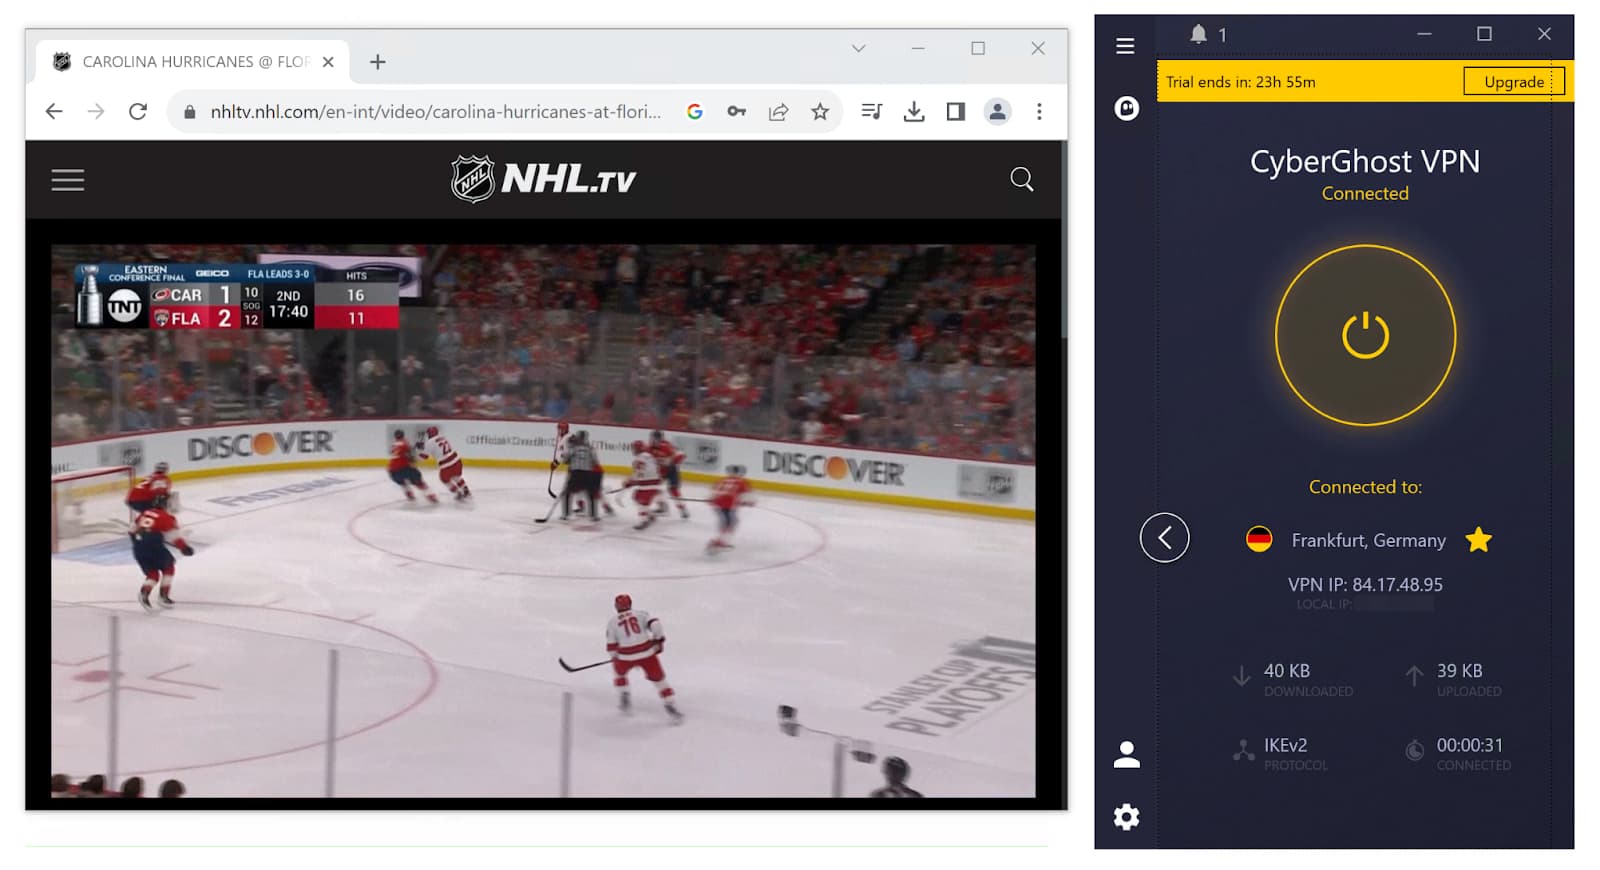 Using CyberGhost to unblock NHL.tv